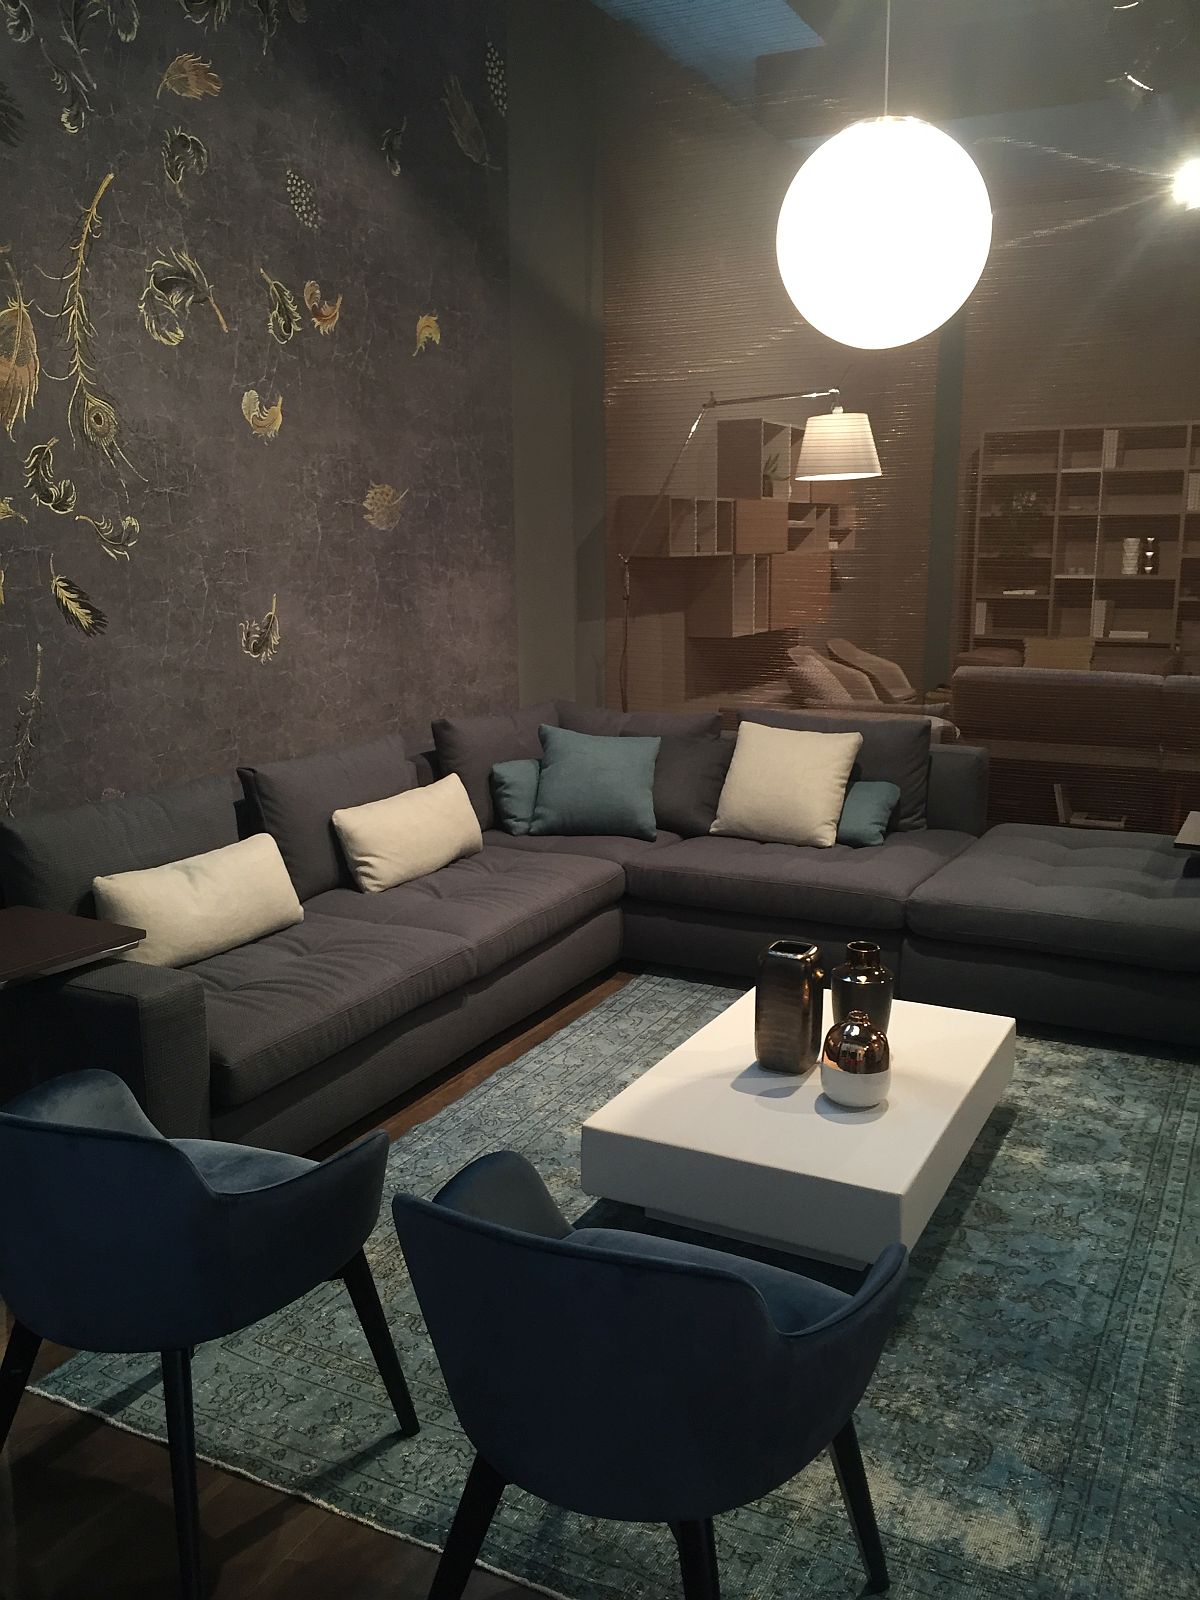 New living room decor series from Gyform at Slaone del Mobile 2016